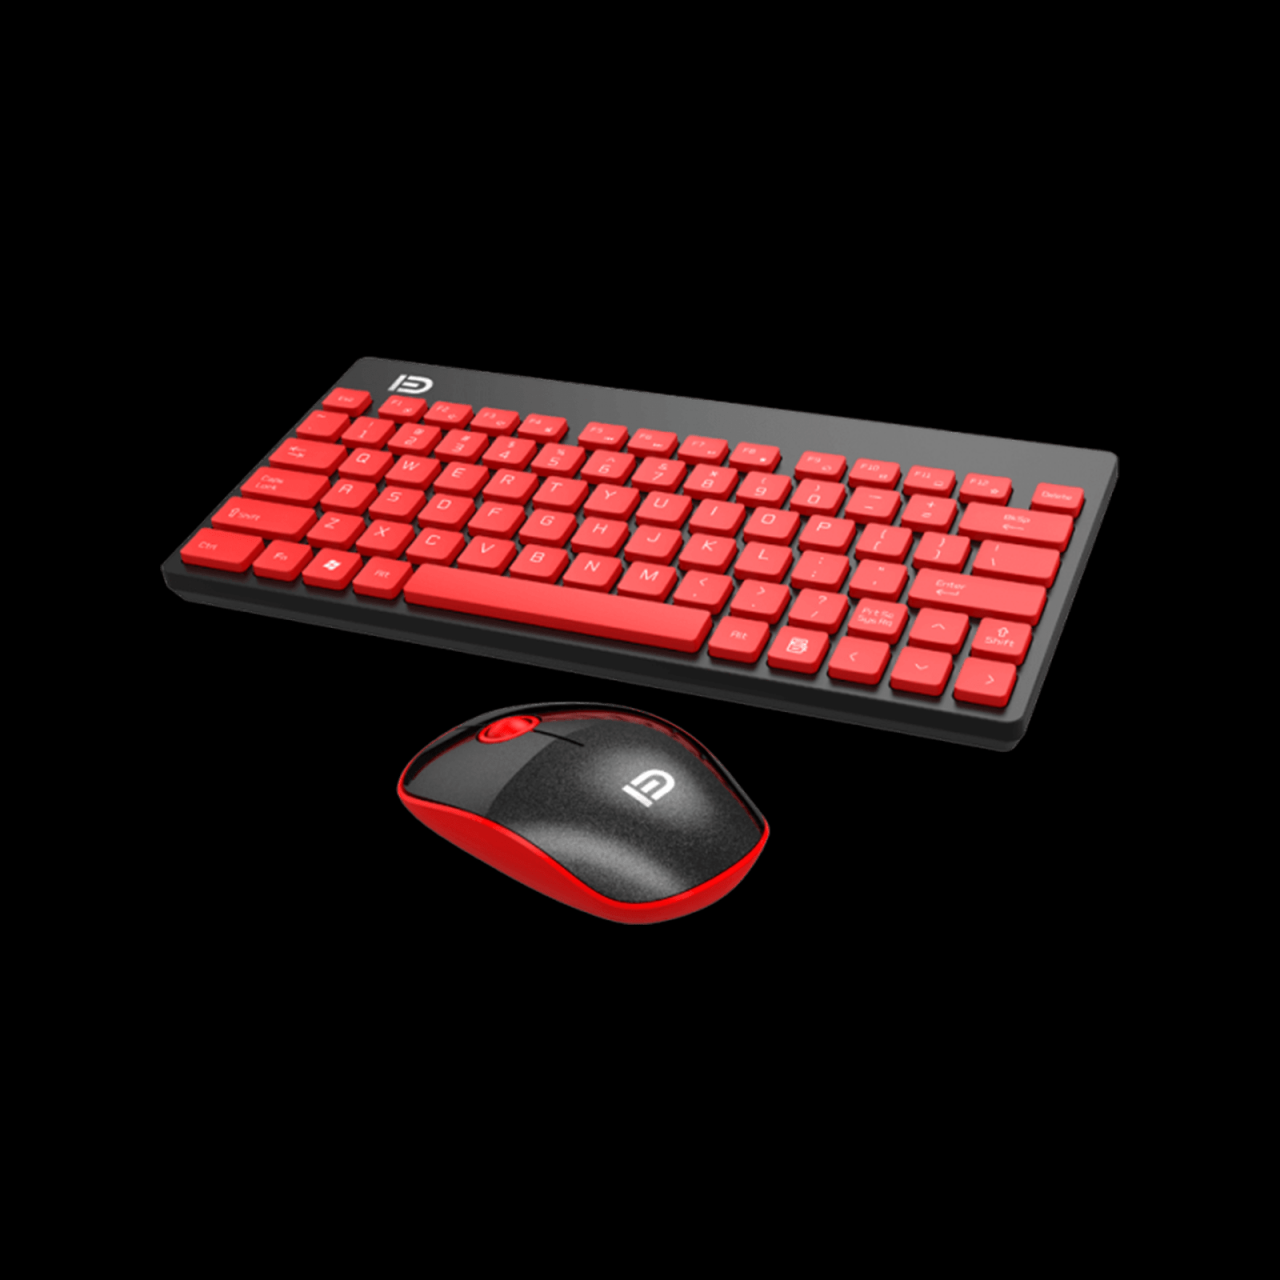 Keyboard mouse red wireless combo cool set 4ghz portable keyboards office gtfs